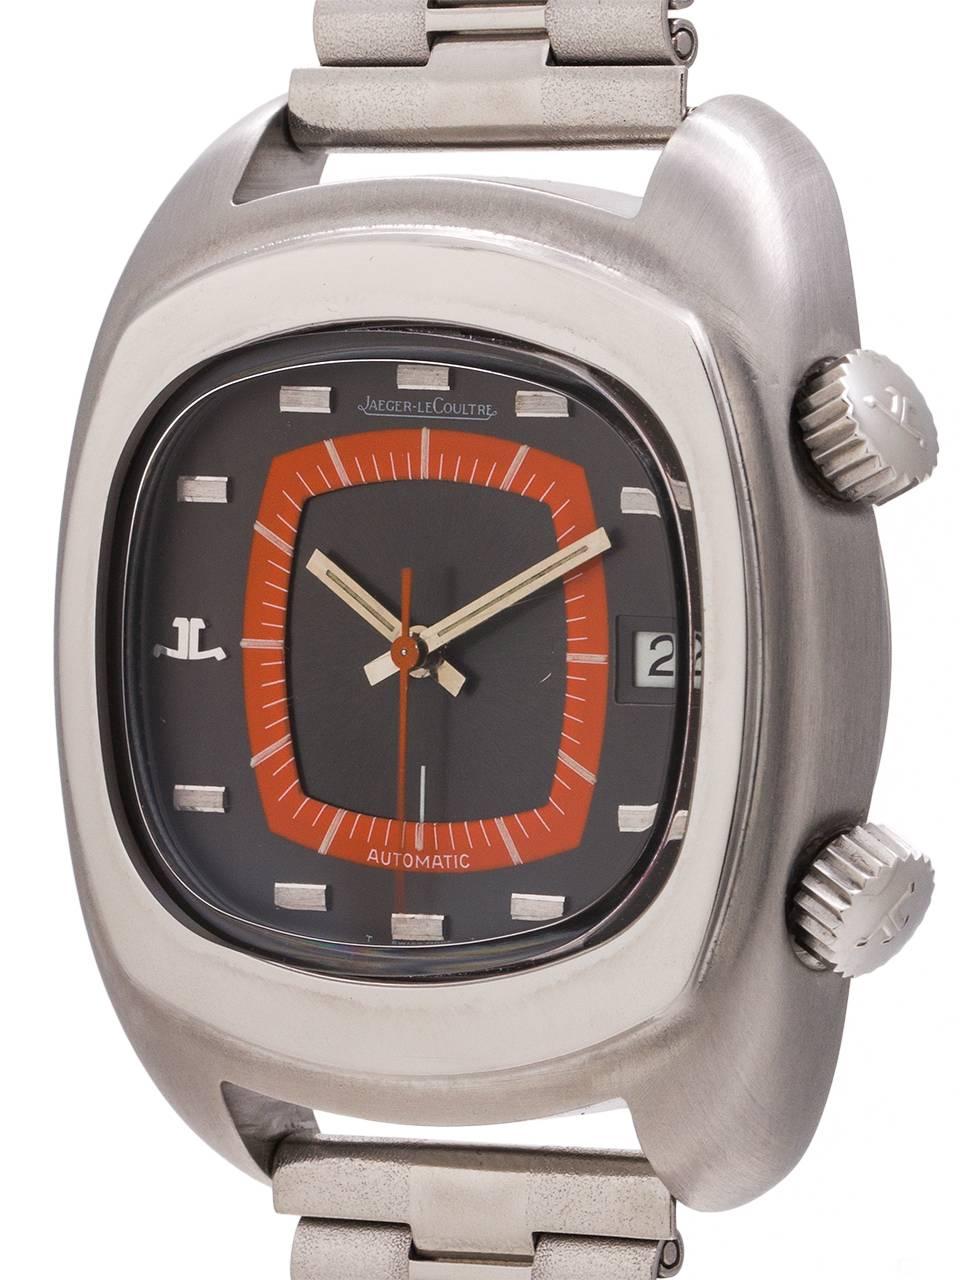 
Jaeger Lecoultre Alarm ref E871 circa 1970’s. Featuring a very modernistic design 38 x 45mm “TV screen” shaped alarm model circa 1970’s with beautiful original orange and charcoal dial with applied silver indexes and silver baton hands. Powered by